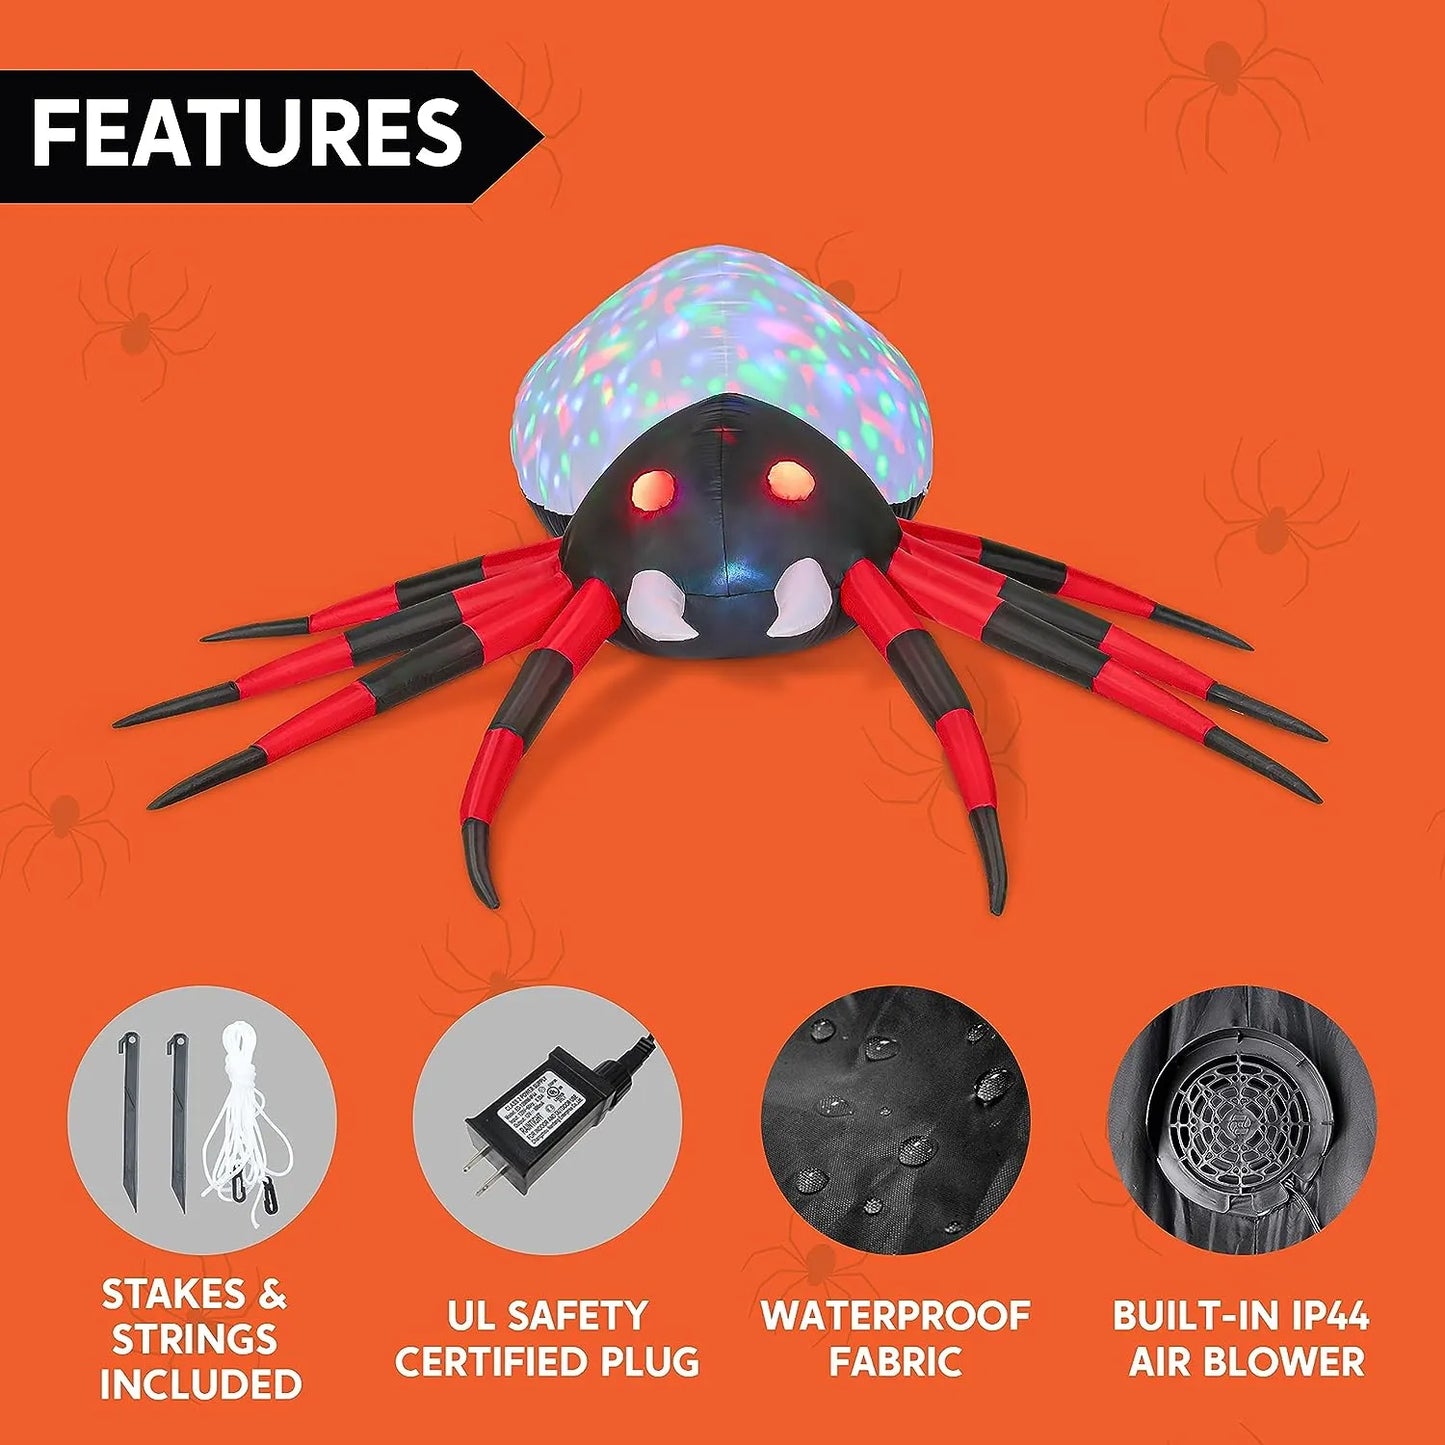 Joiedomi 12ft Long LEDs Halloween Inflatable Spider